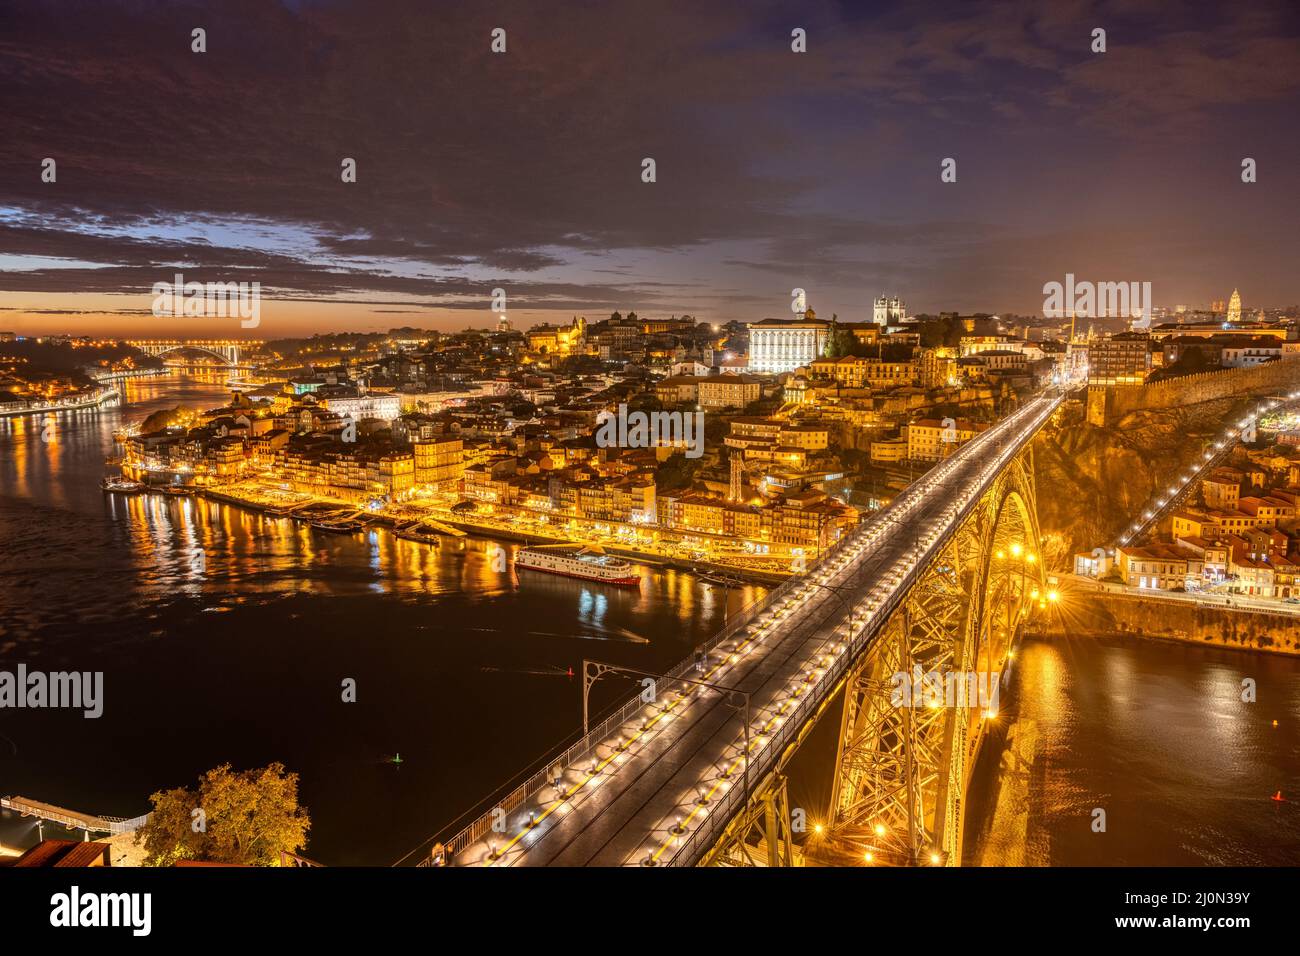 View of Porto with the river Douro and the Dom Luis I bridge at night Stock Photo